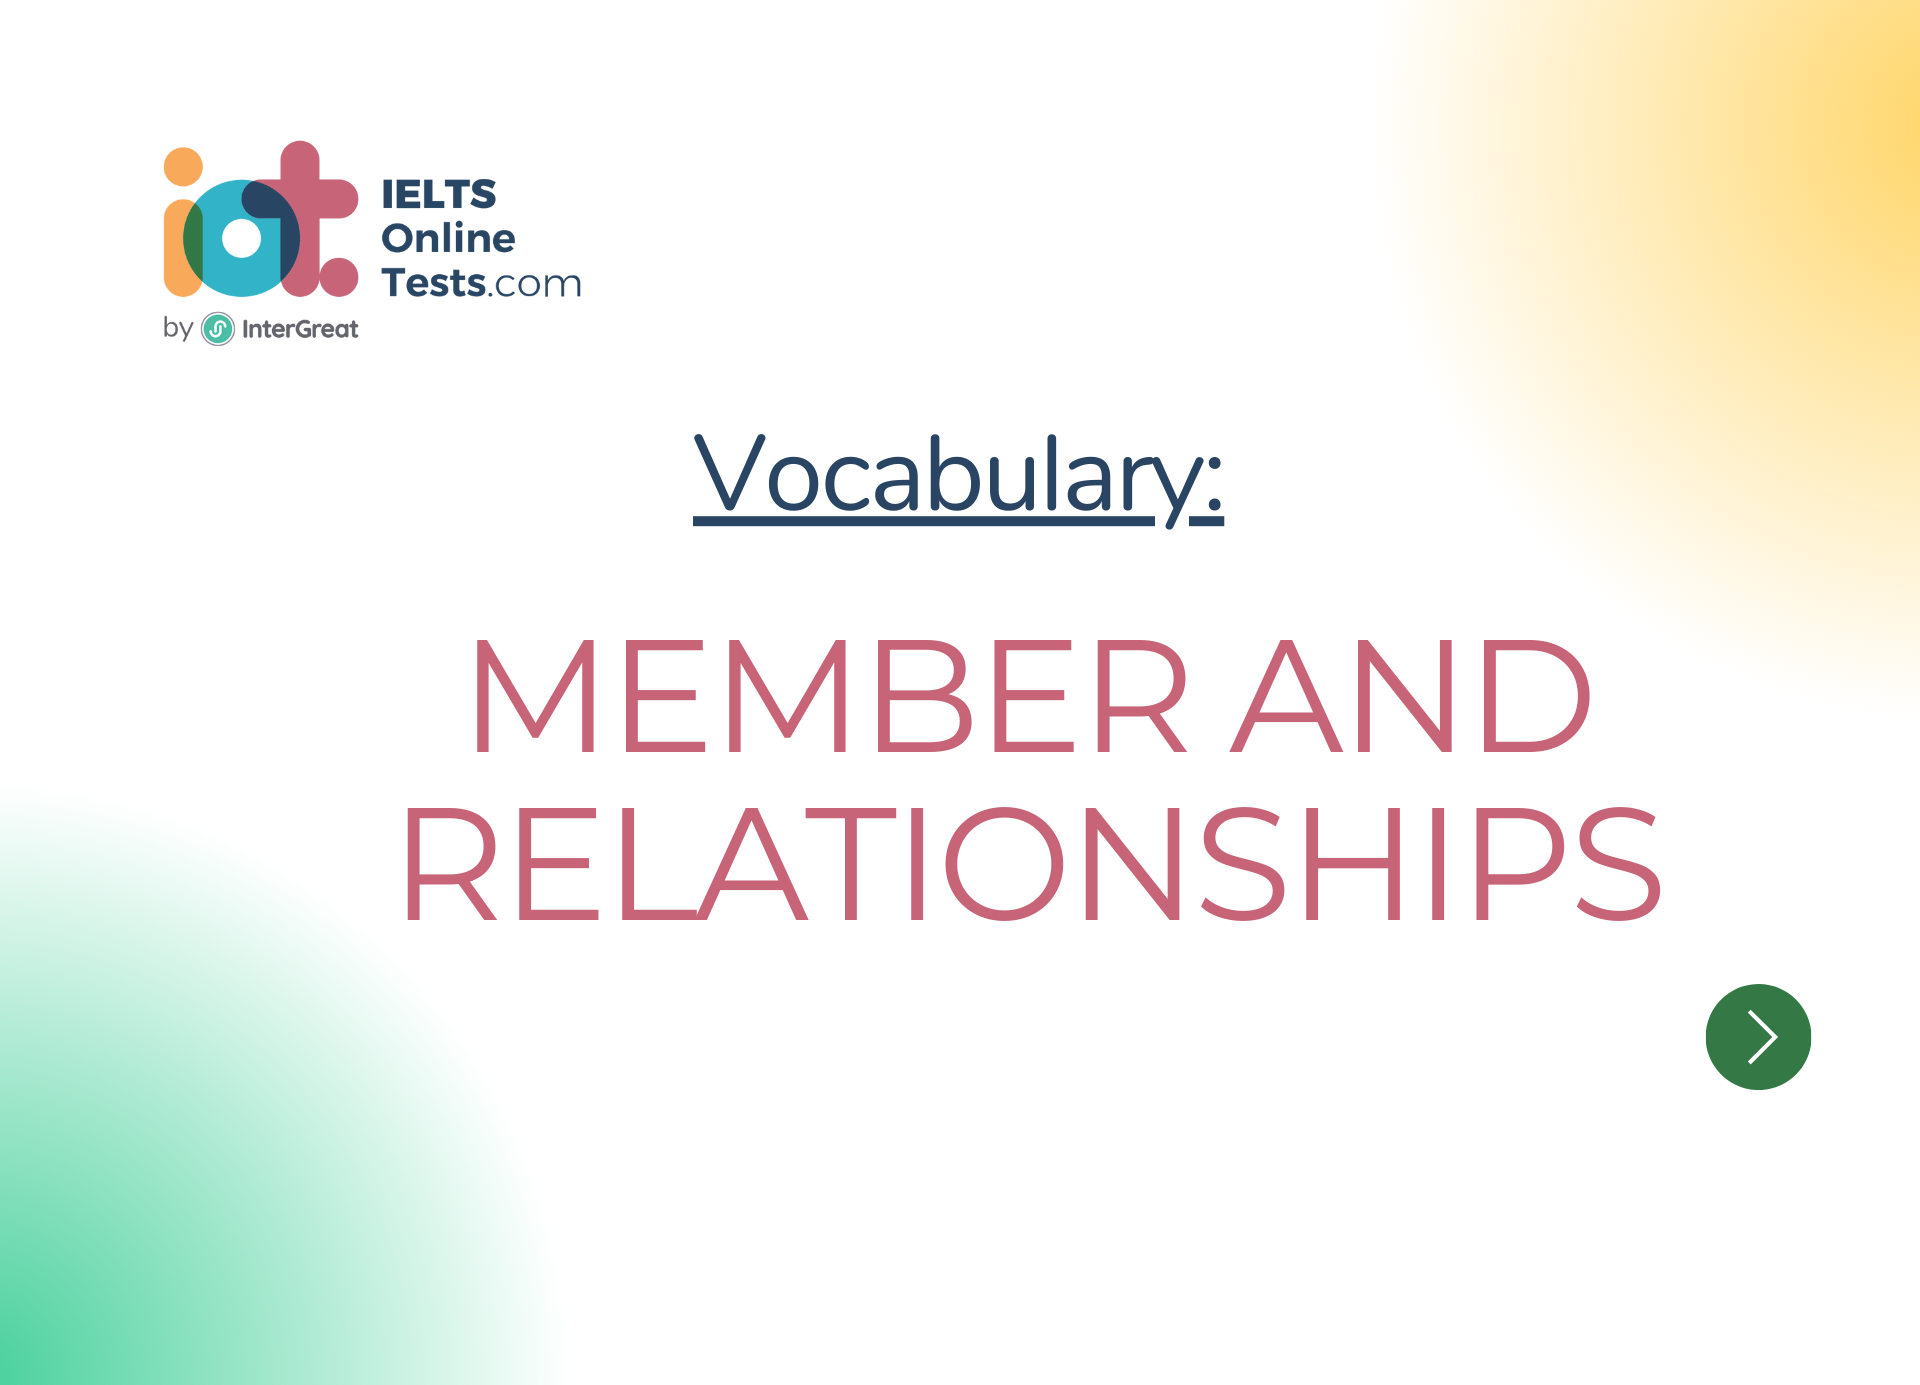 Member and Relationships